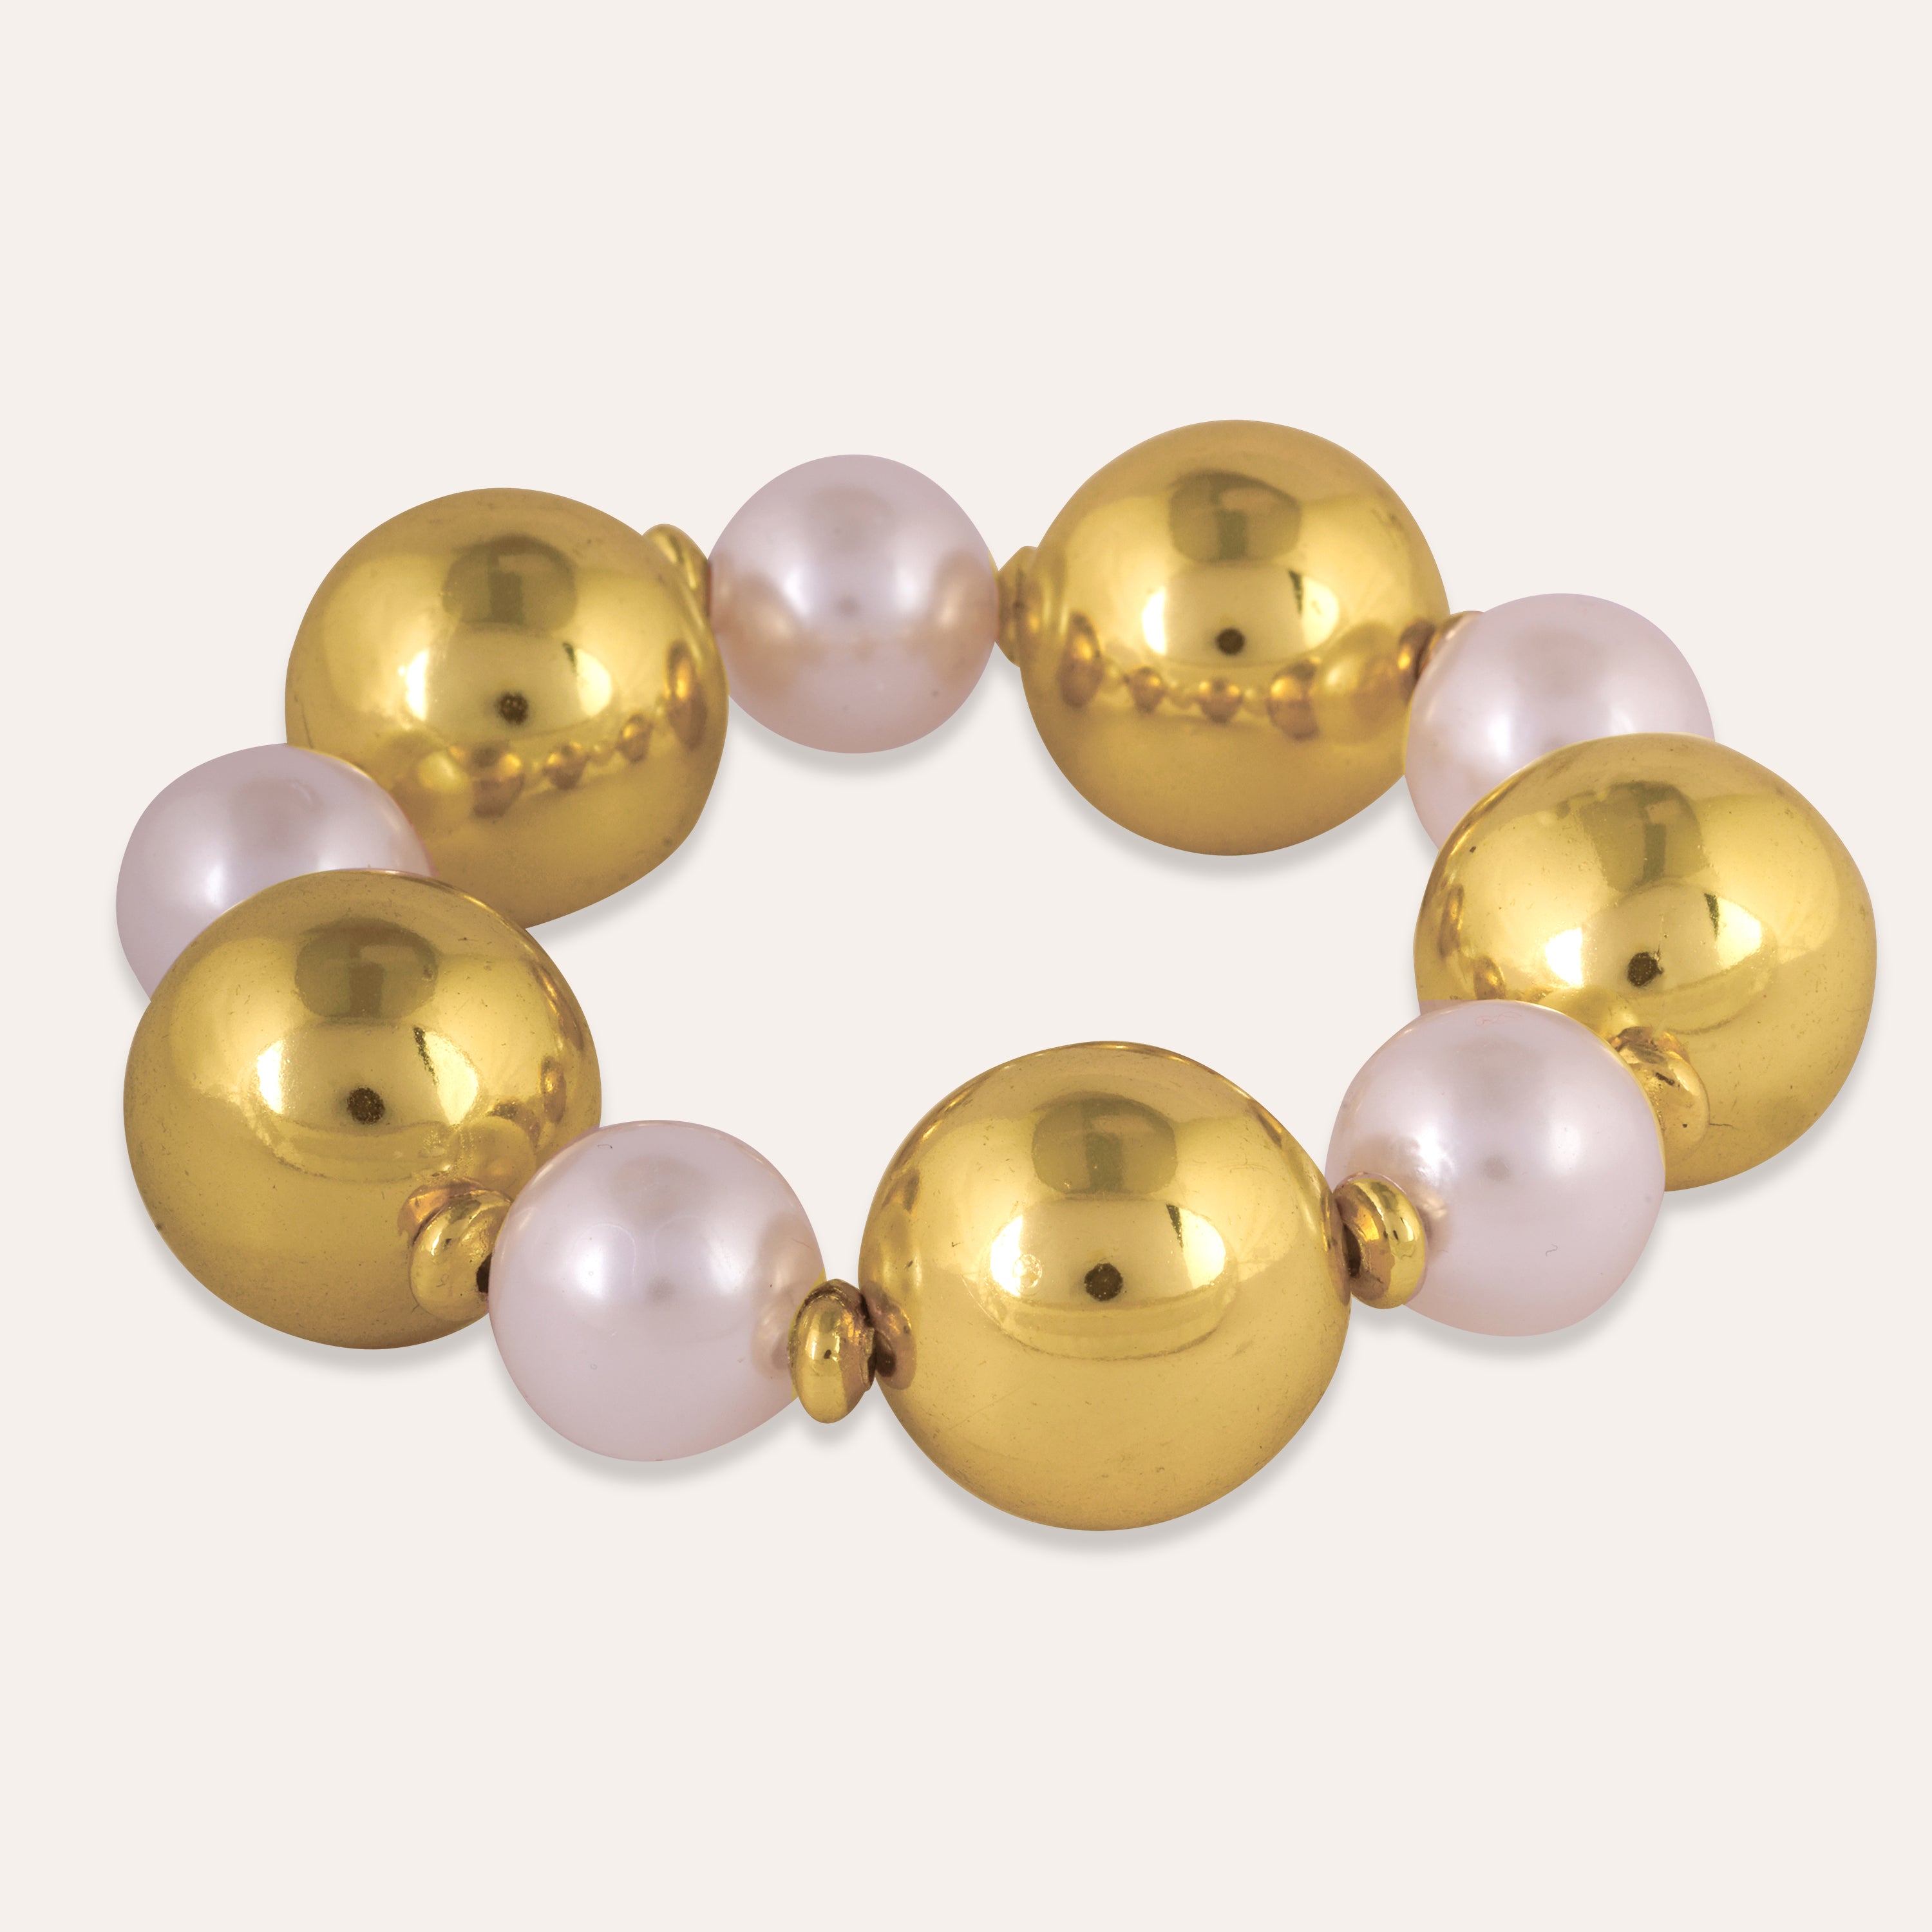 TFC Bold And Gold Pearl Bead Bracelet-Discover our stunning collection of stylish bracelets for women, featuring exquisite pearl bracelets, handcrafted beaded bracelets, and elegant gold-plated designs. Enjoy cheapest anti-tarnish fashion jewellery and long-lasting brilliance onl